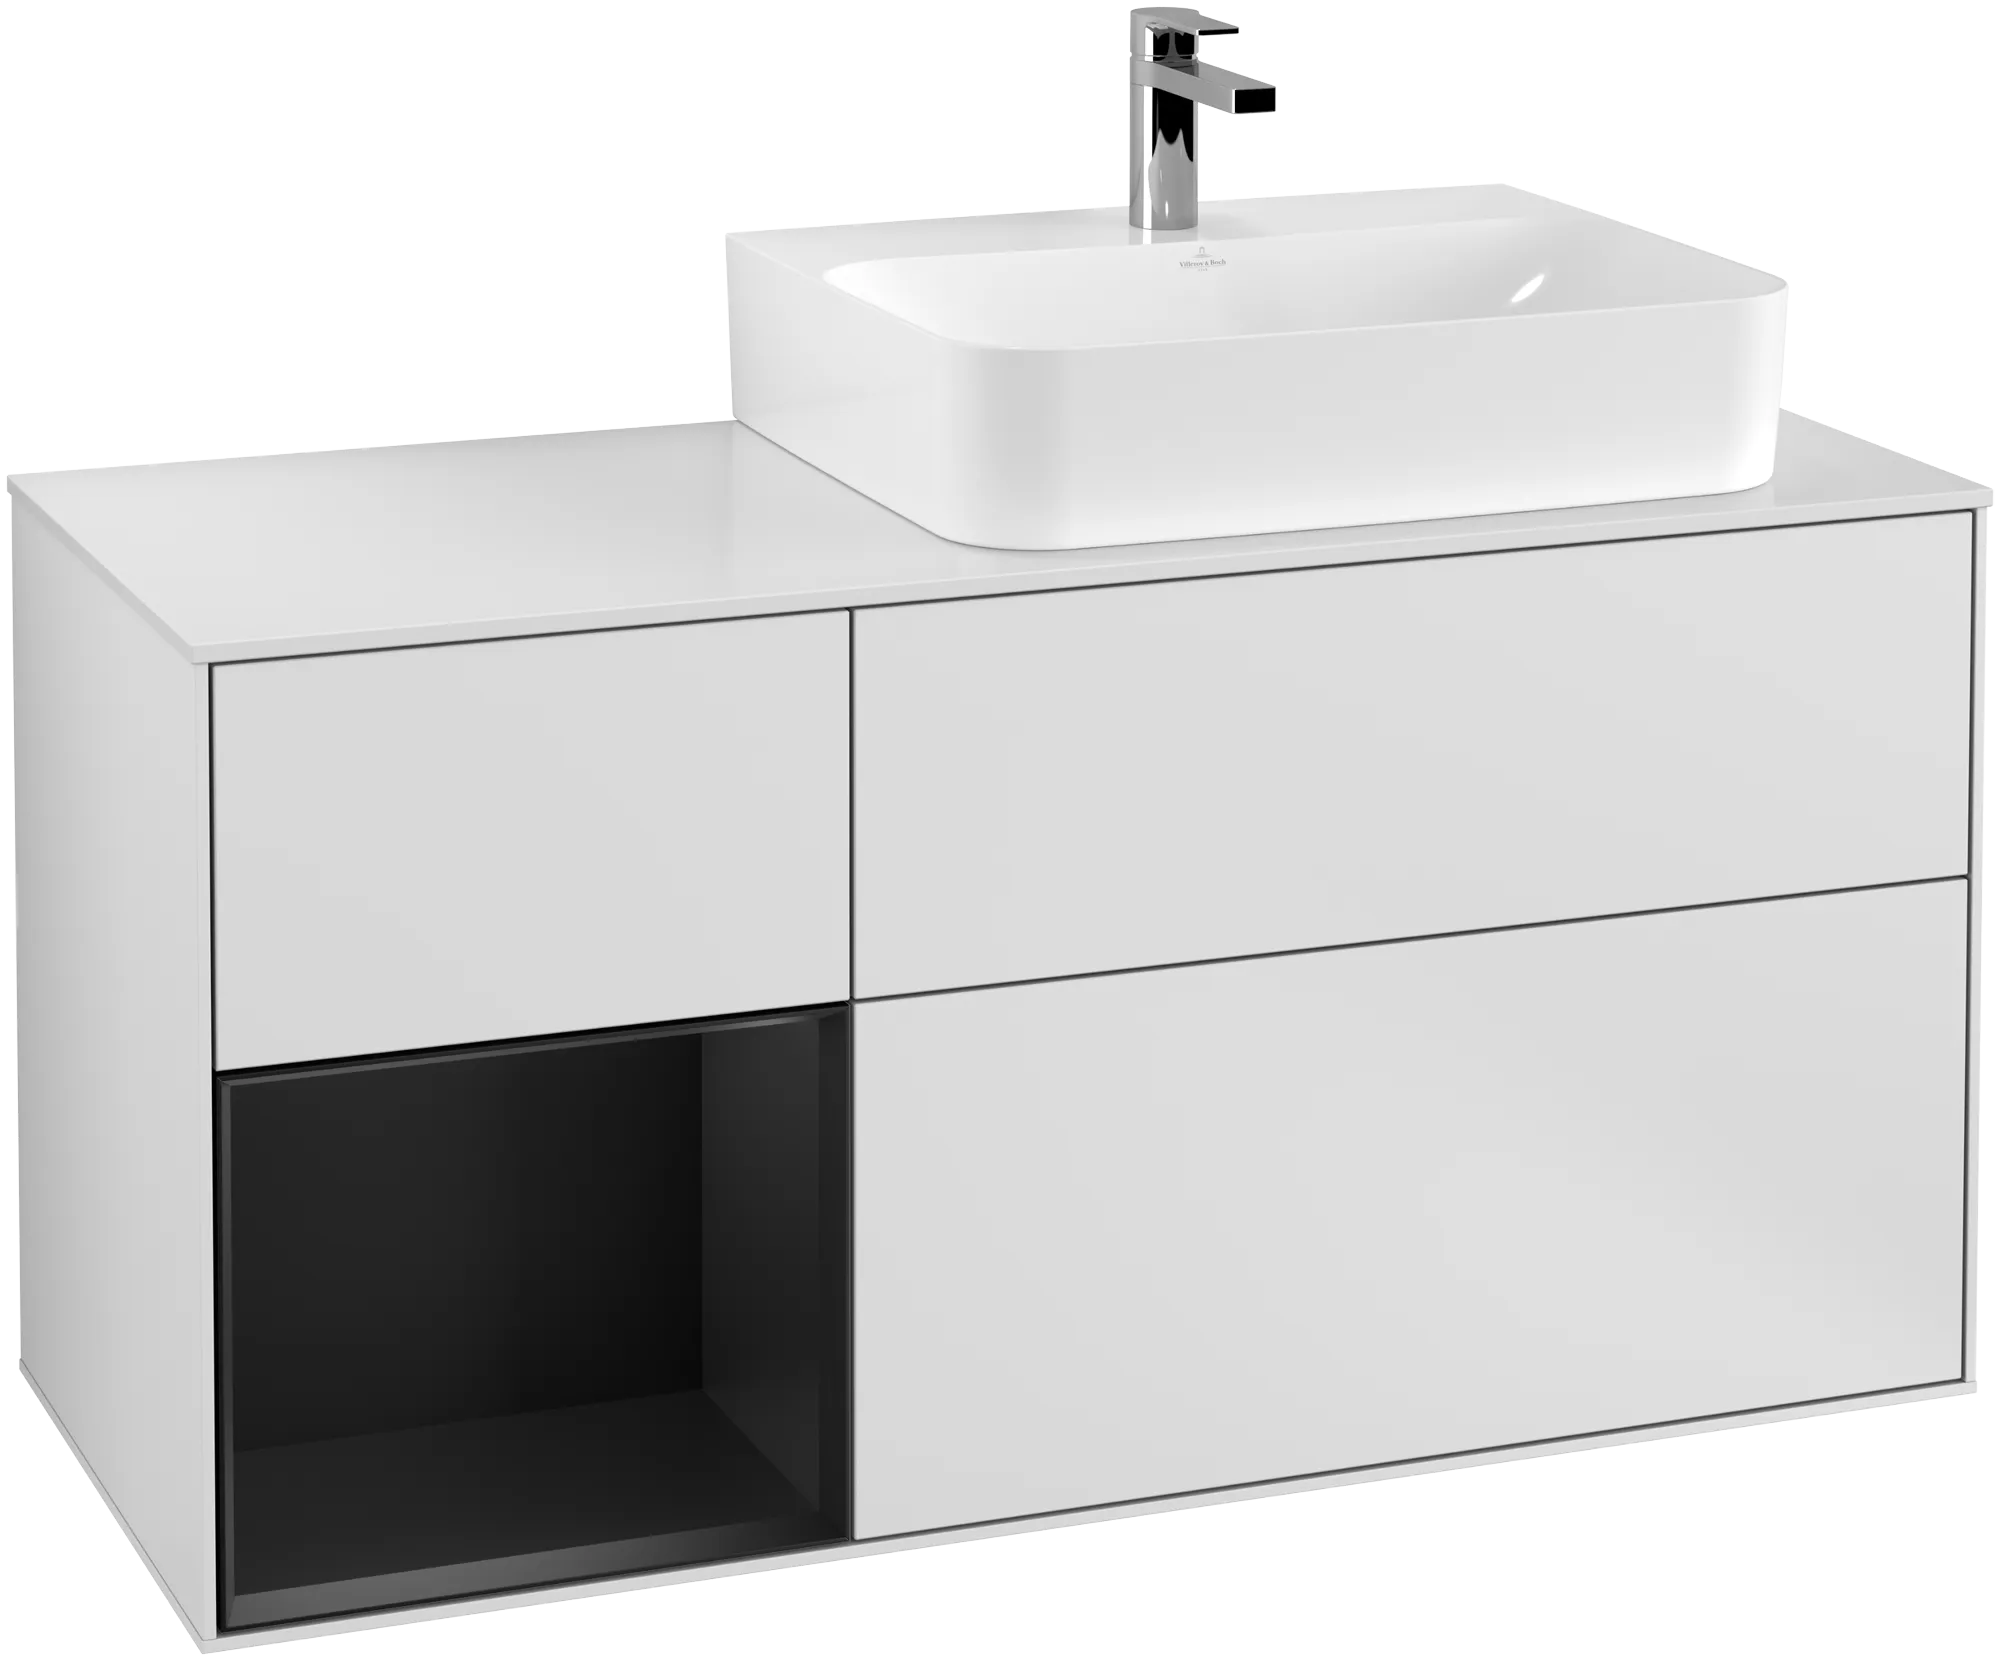 Picture of VILLEROY BOCH Finion Vanity unit, with lighting, 3 pull-out compartments, 1200 x 603 x 501 mm, White Matt Lacquer / Black Matt Lacquer / Glass White Matt #G141PDMT